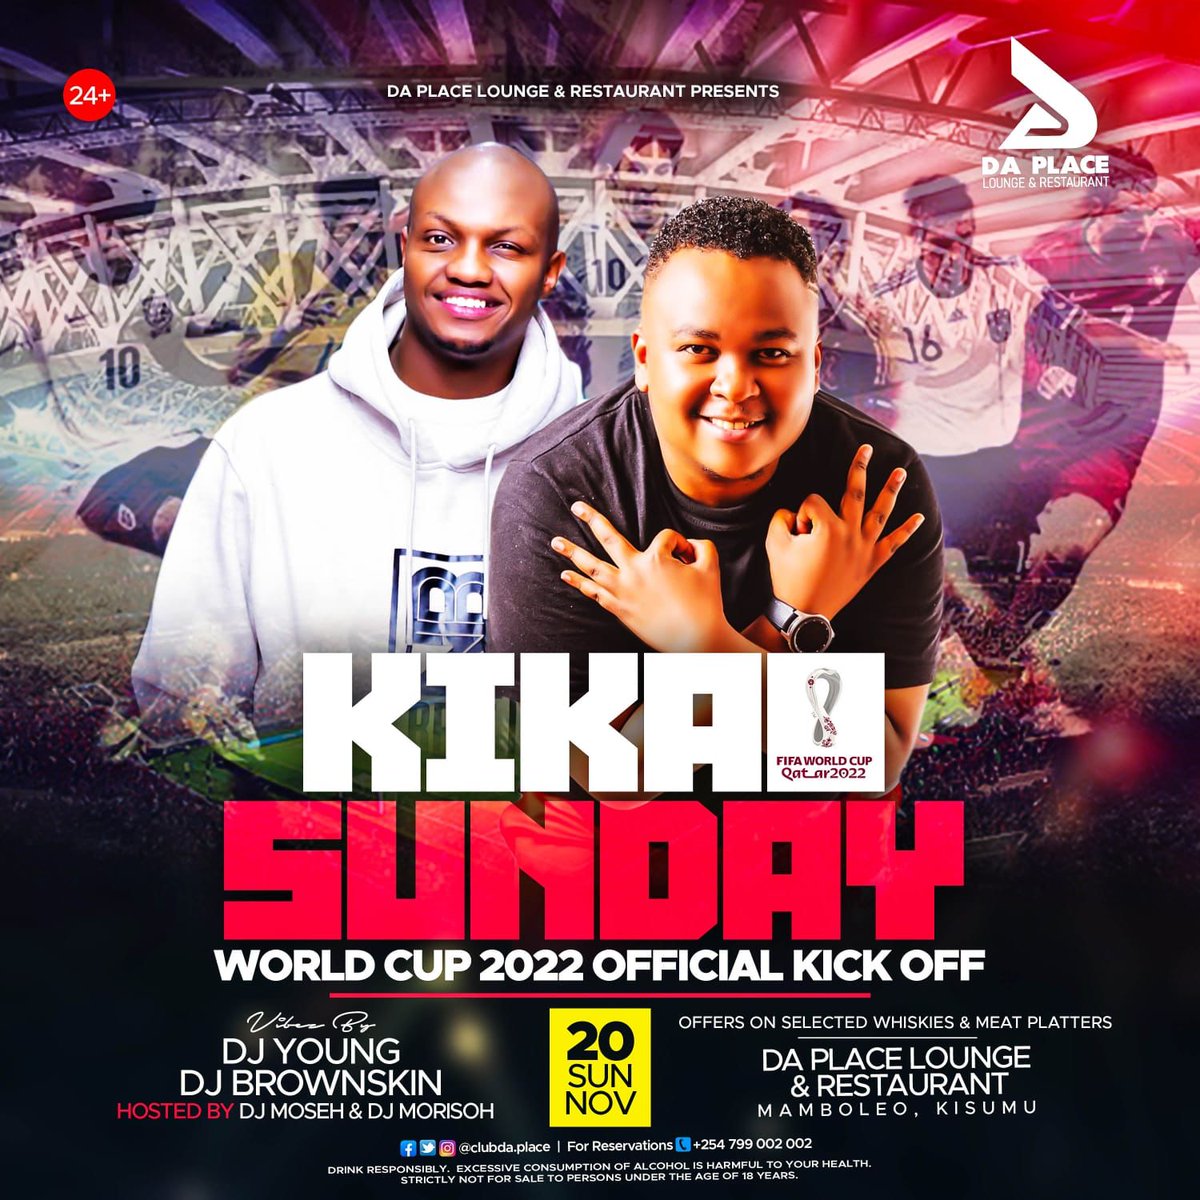 Reposted from @clubda.place #KISUMU OFFICIAL WORLD CUP KICK OFF PARTY This Sunday with DJ YOUNG & DJ BROWNSKIN 🔥🔥 Catch all the action Live from our football arena with plenty offers throughout 💯💯 #worldcup2022 #kickoff #party #EnjoymentHeadquarters #BeThere